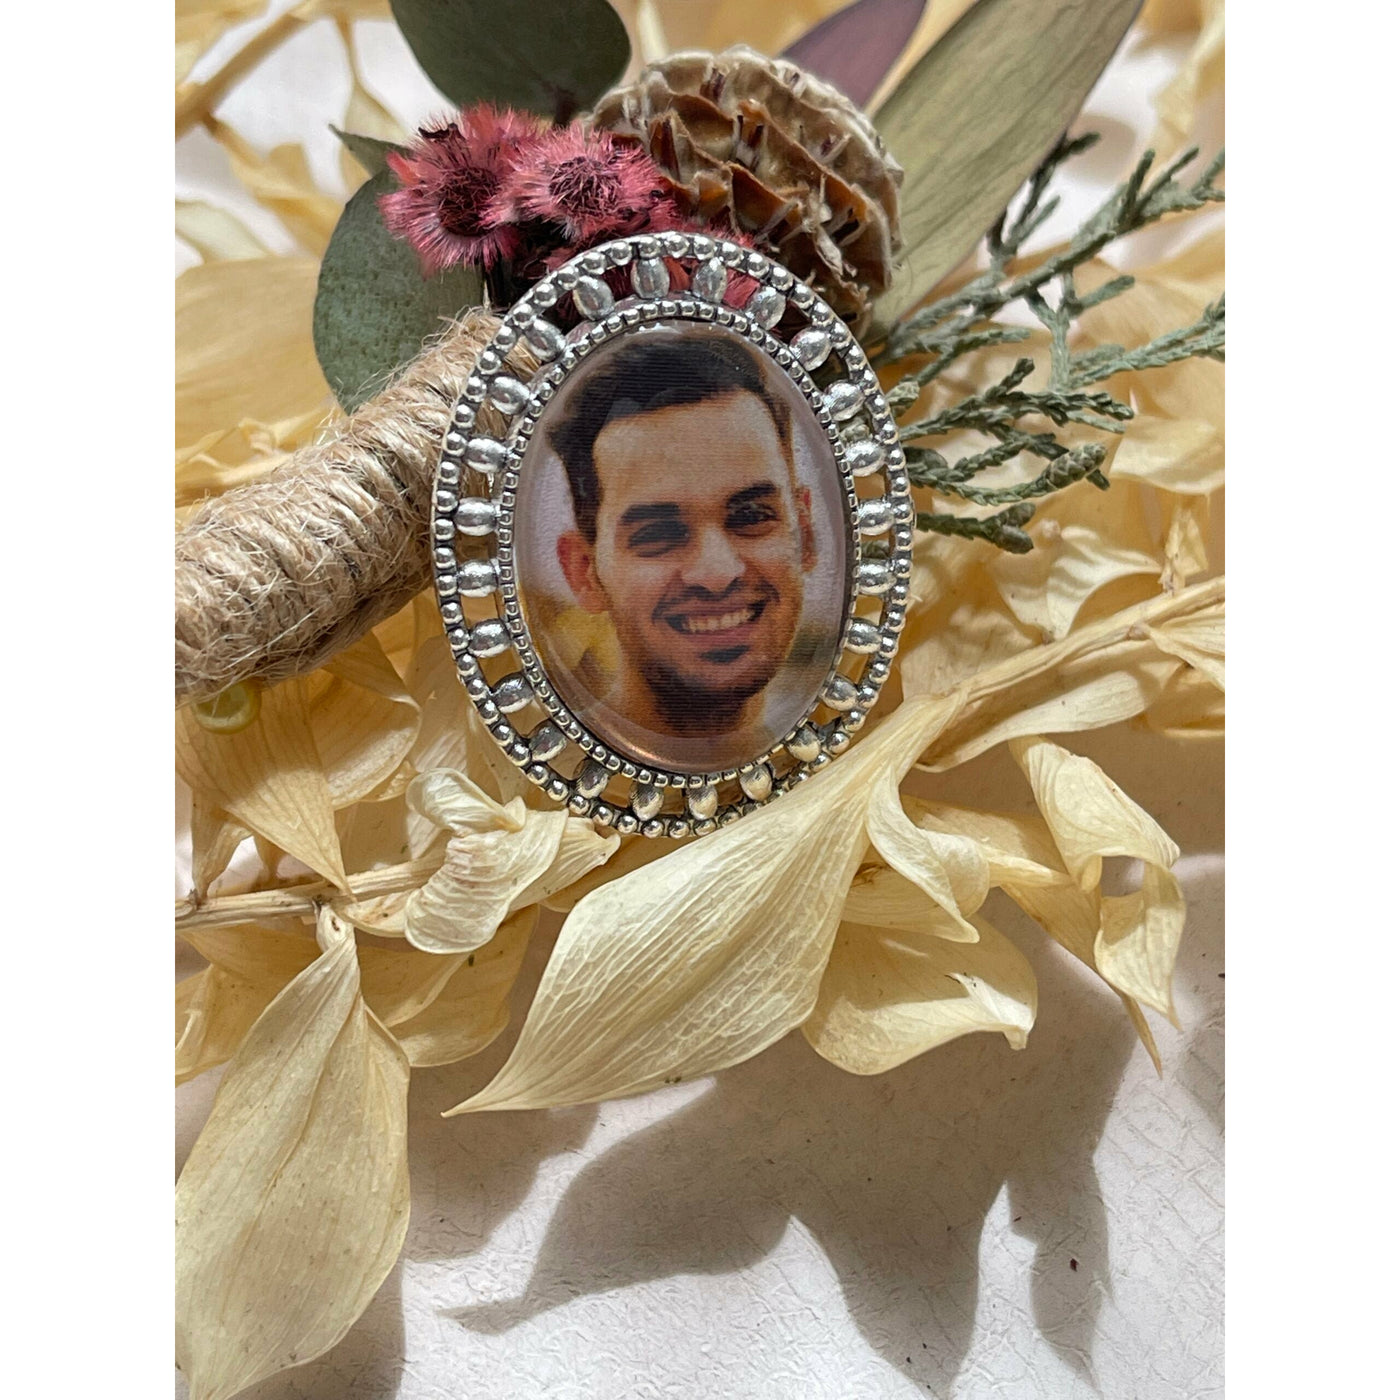 A memorial brooch or memorial pin in the design called Brogue, showing a photo of a young man. The pin is nestled on dried Australian native flowers and is intended to be pinned to a wedding bouquet or wedding jacket to include a deceased relative on your wedding day.